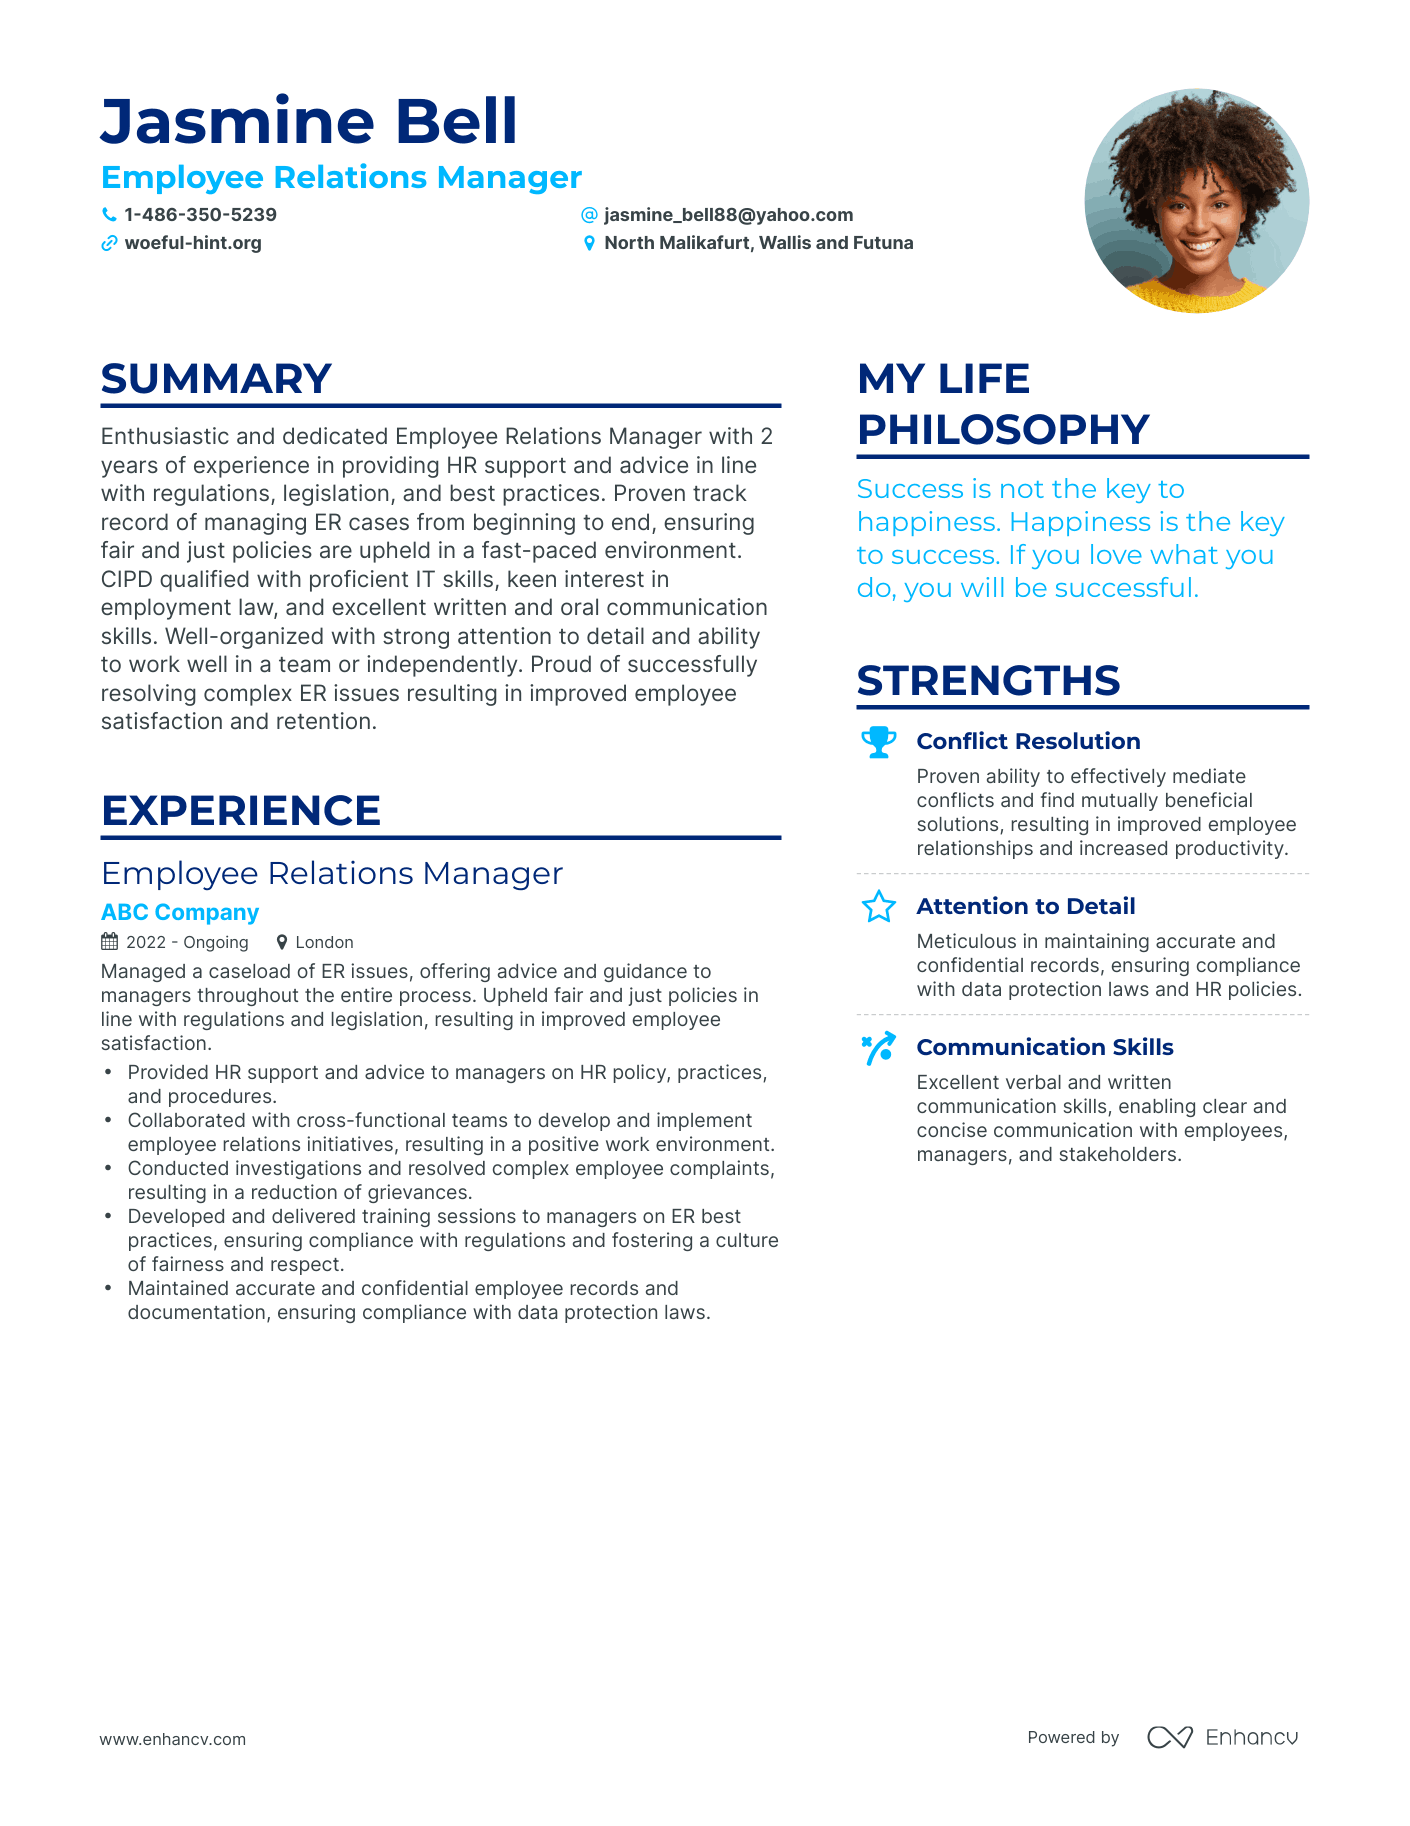 Employee Relations Manager resume example